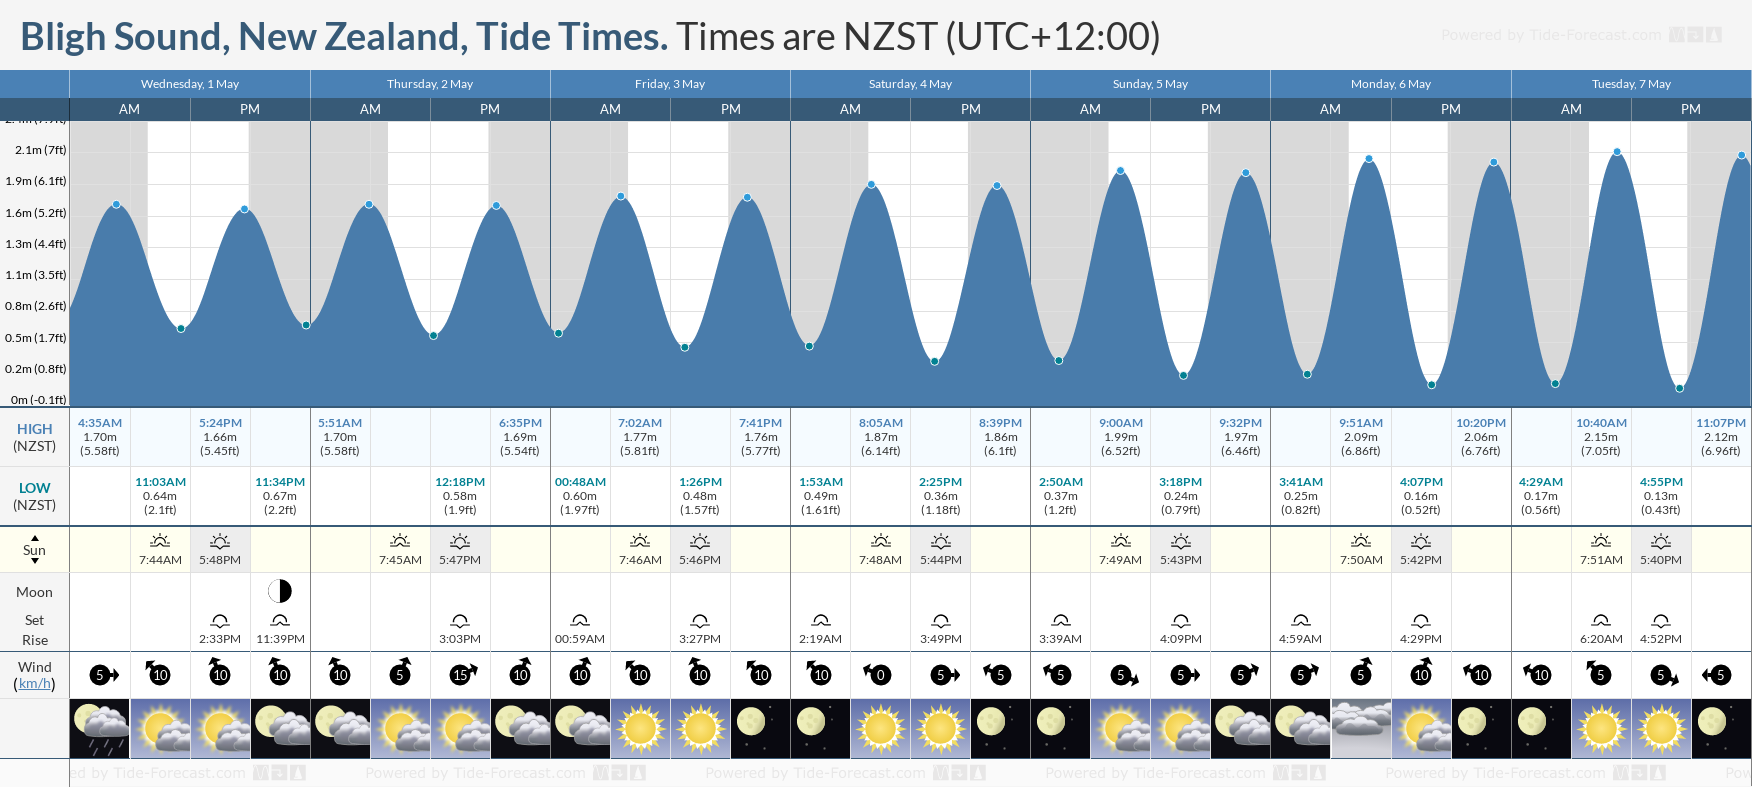 Bligh Sound, New Zealand Tide Chart including high and low tide tide times for the next 7 days